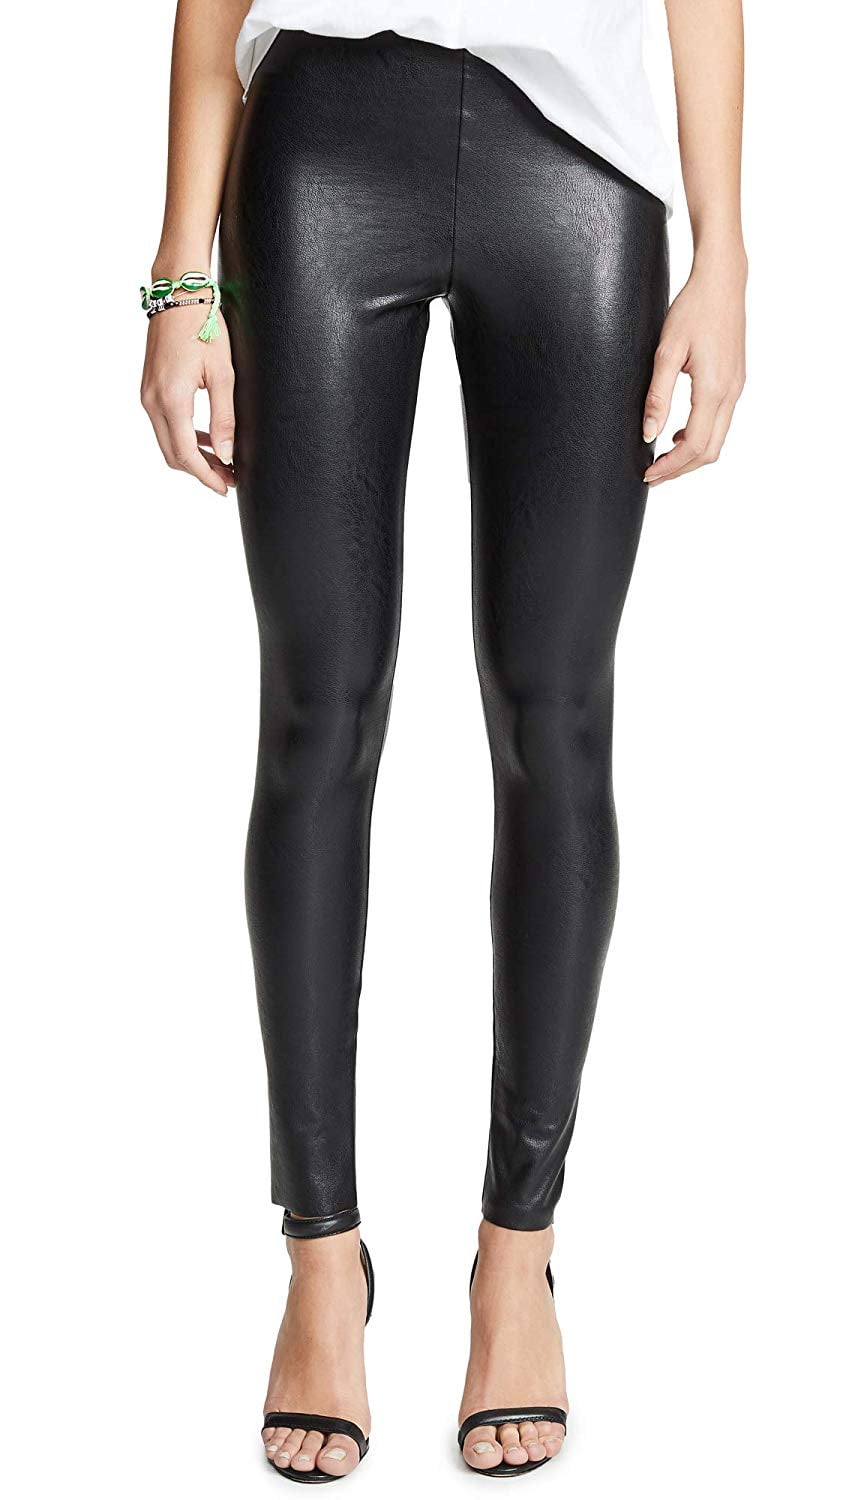 Commmando BLACK Faux Leather Legging with Perfect Control, US X-Small 